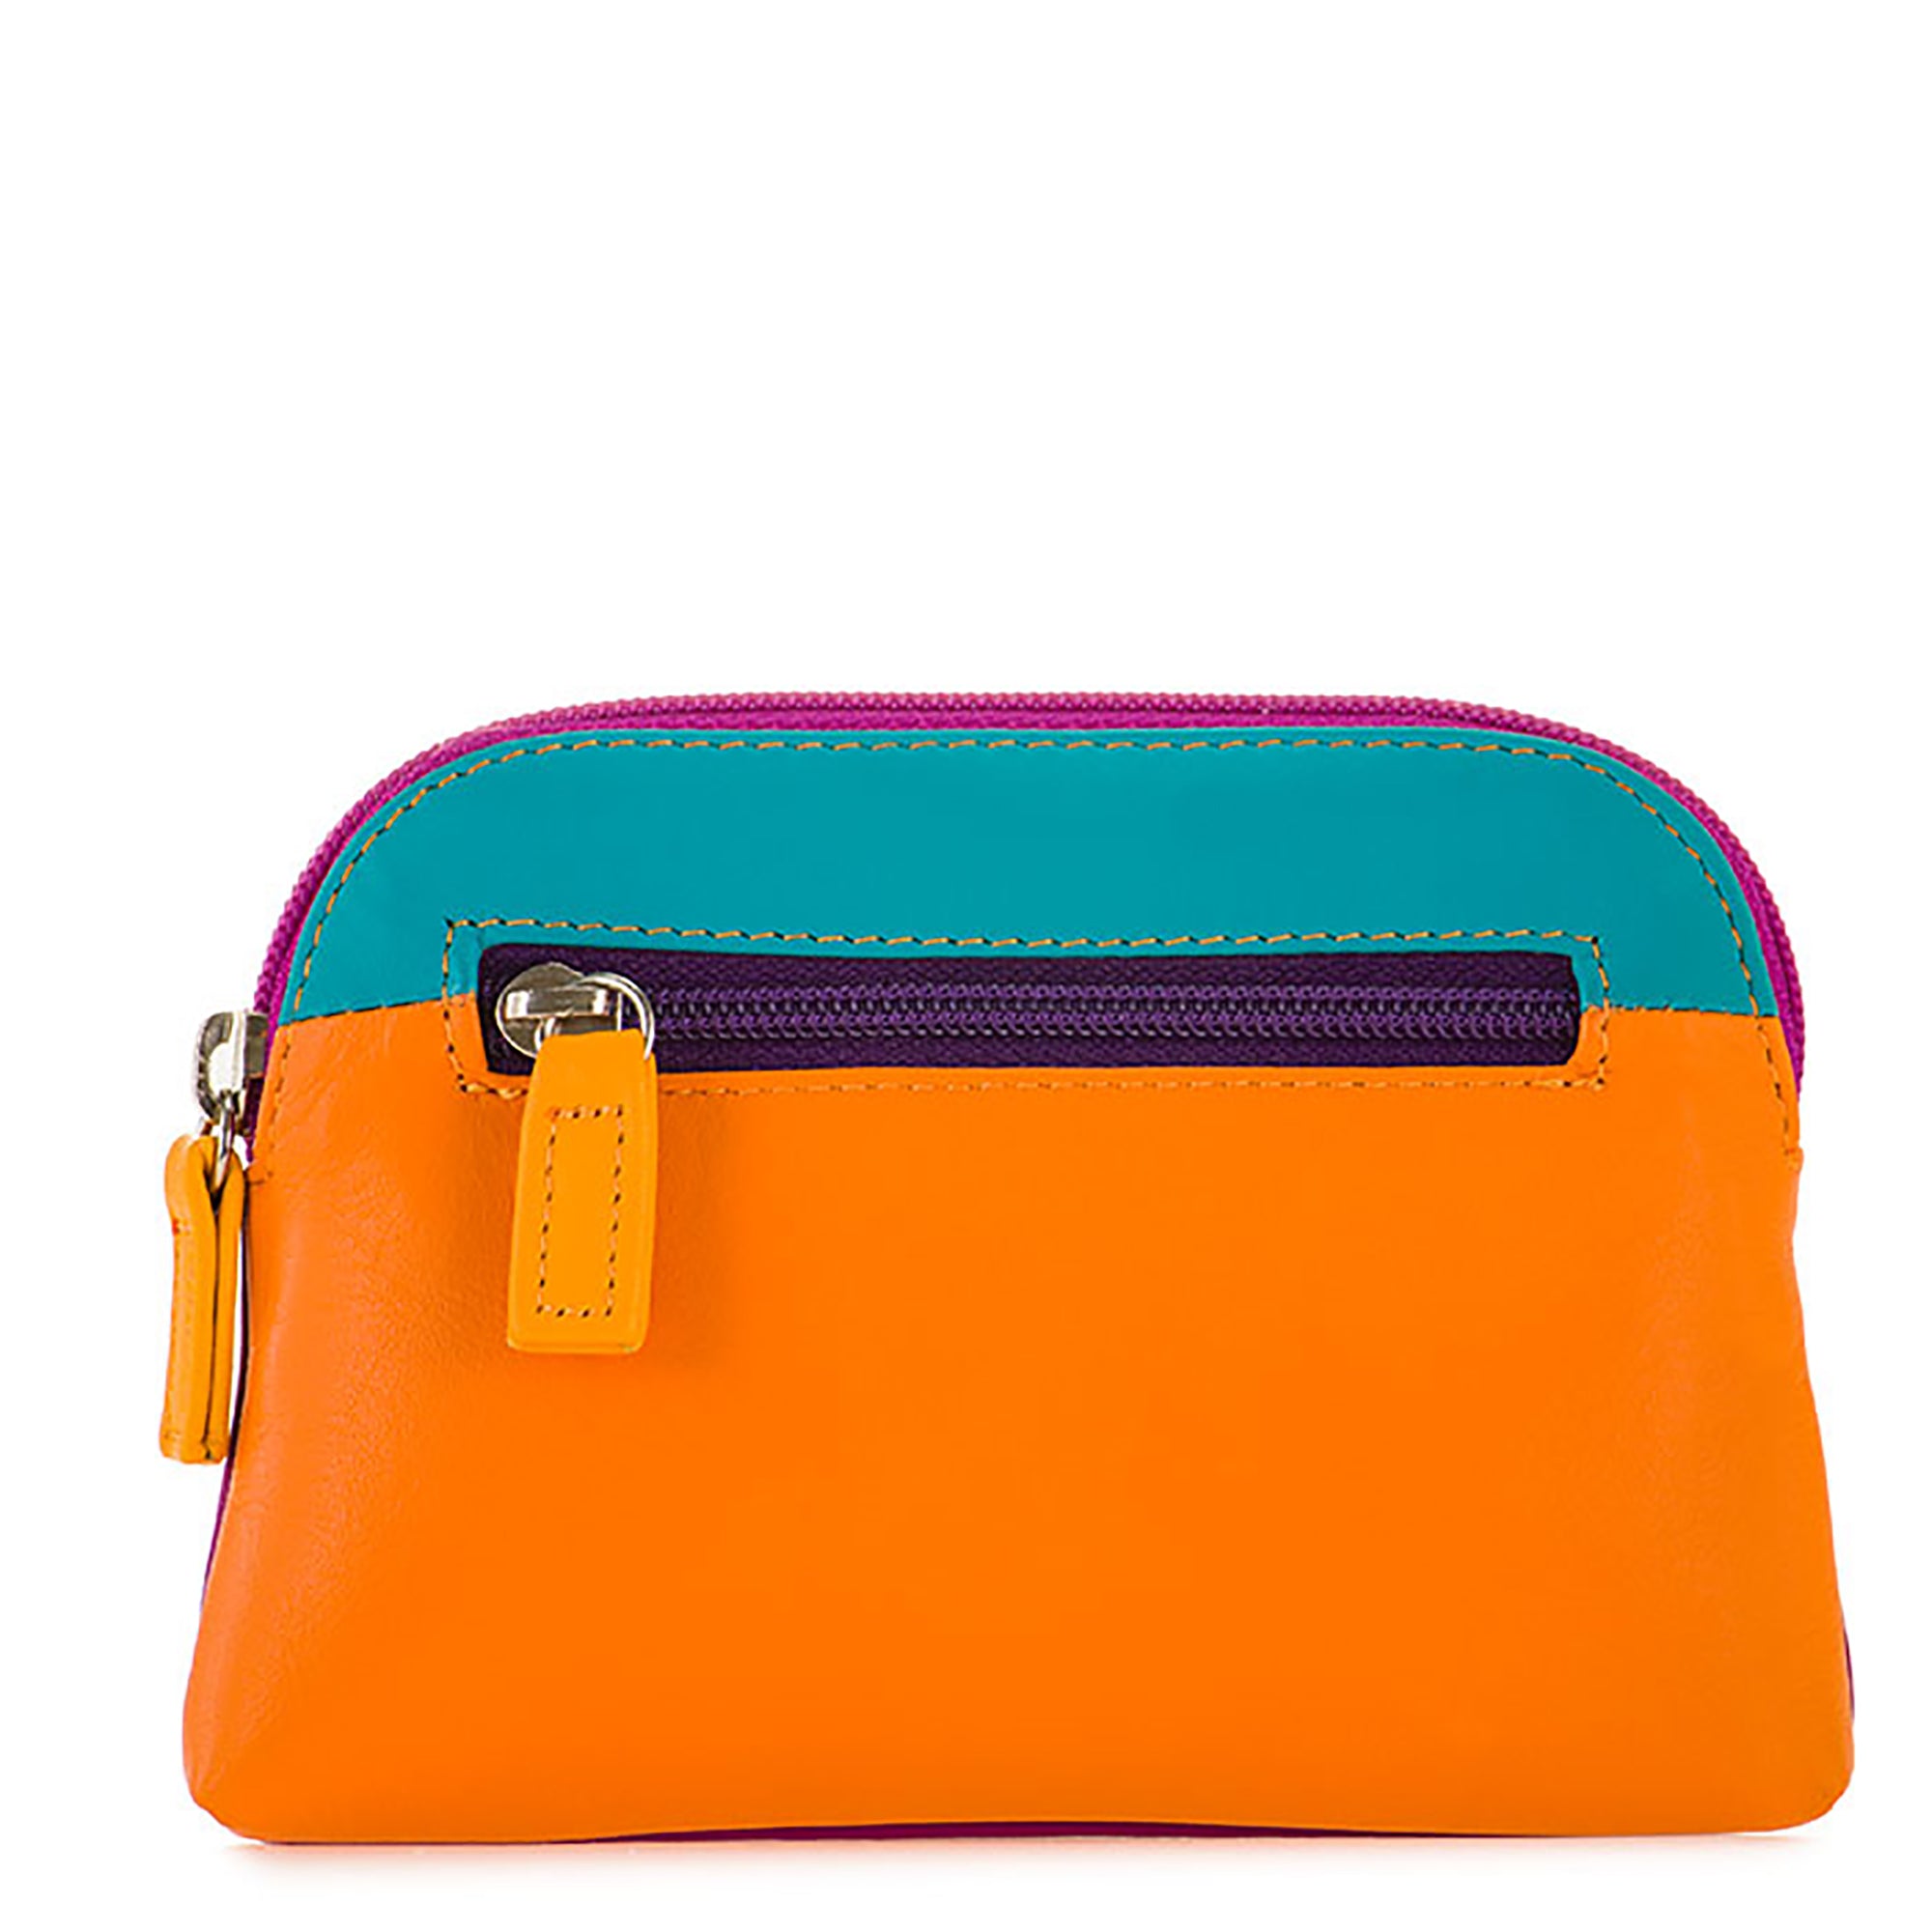 Colorful Leather Coin Purse- Copacabana | Getty Store